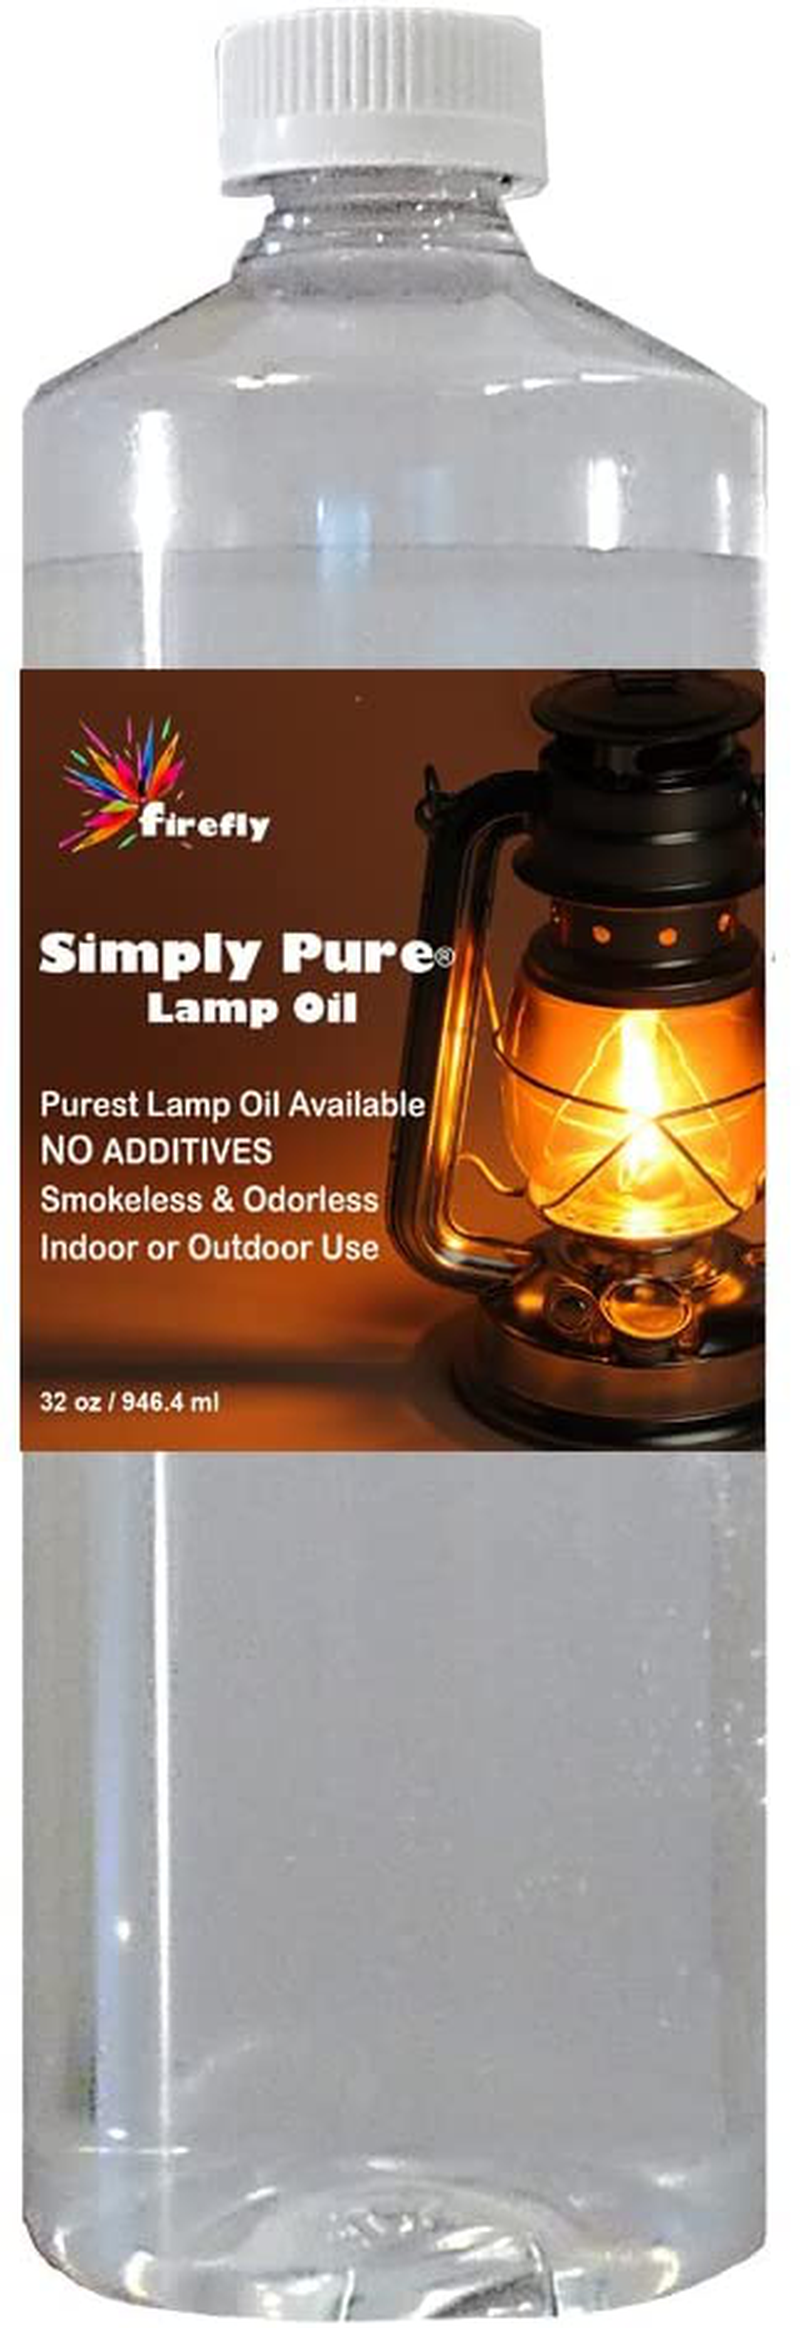 Firefly Kosher Paraffin Lamp Oil - 1 Gallon - Odorless & Smokeless - Simply Pure - Ultra Clean Burning Liquid Paraffin Fuel